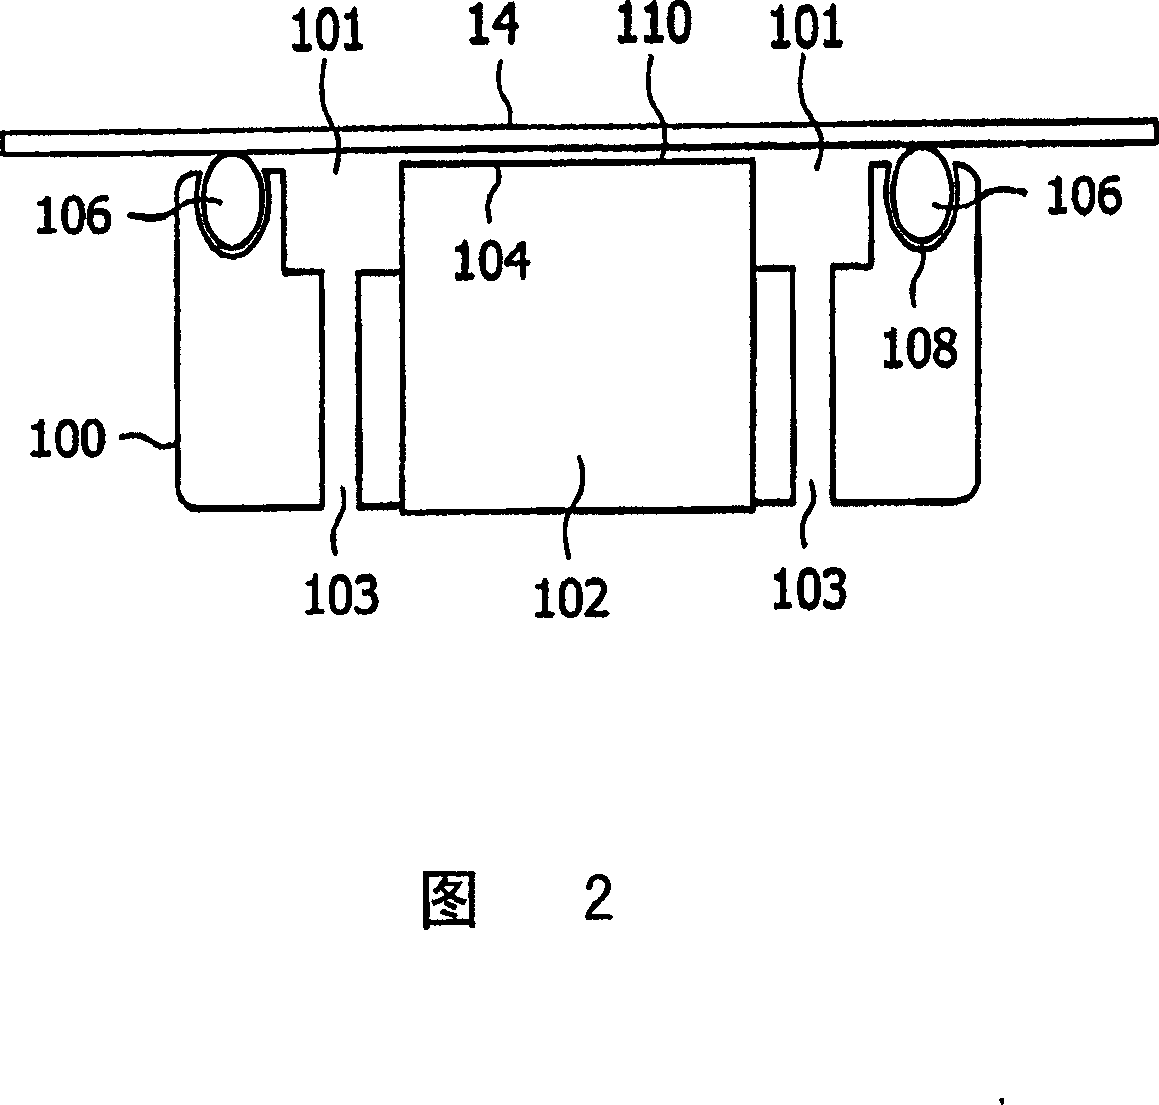 A transducer unit incorporating an acoustic coupler